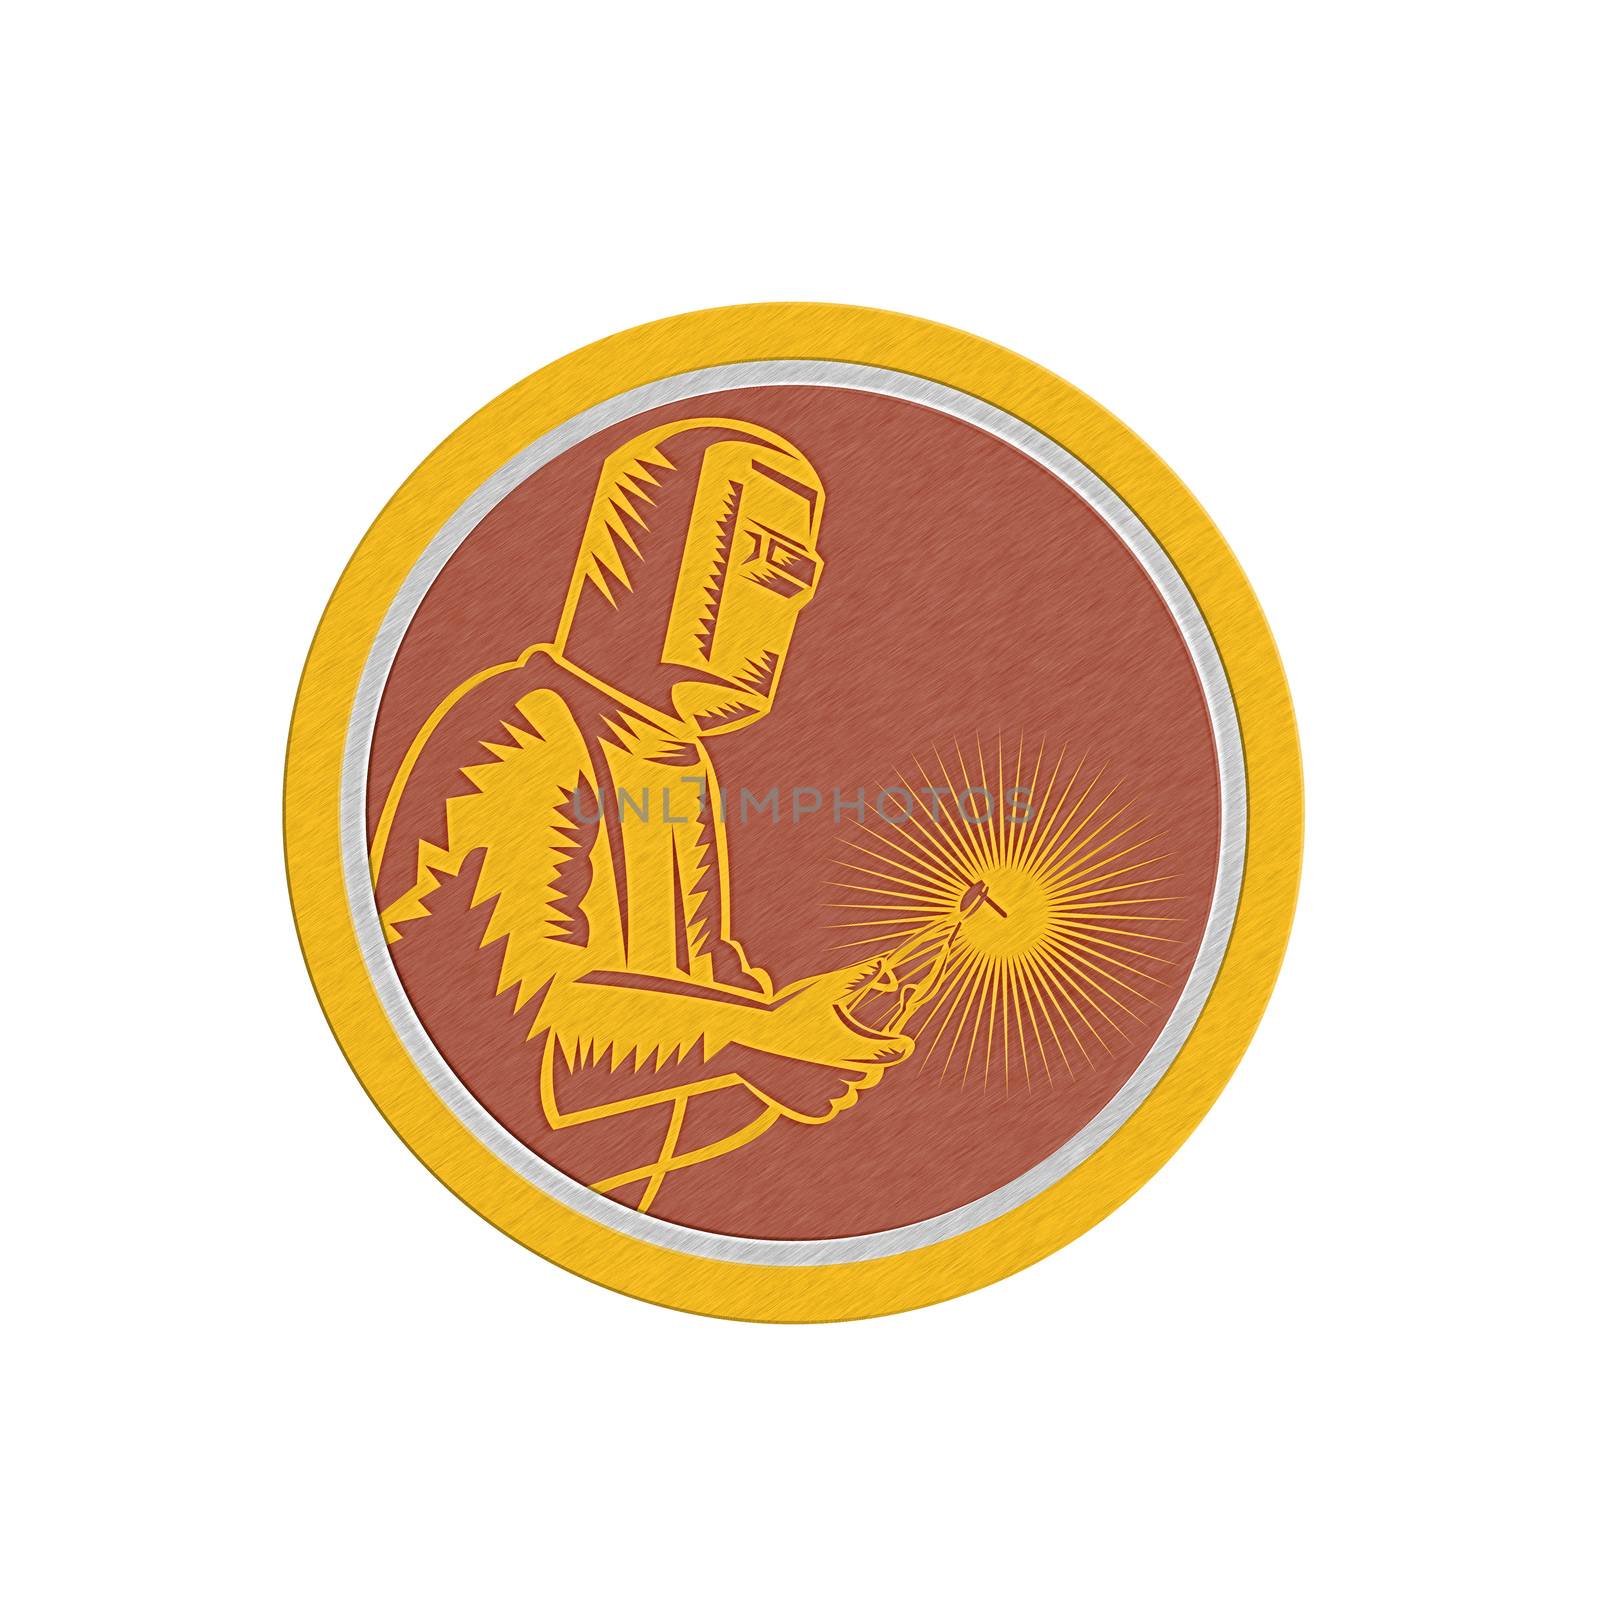 Metallic styled illustration of welder worker working holding welding torch side view set inside circle on isolated background done in retro style.